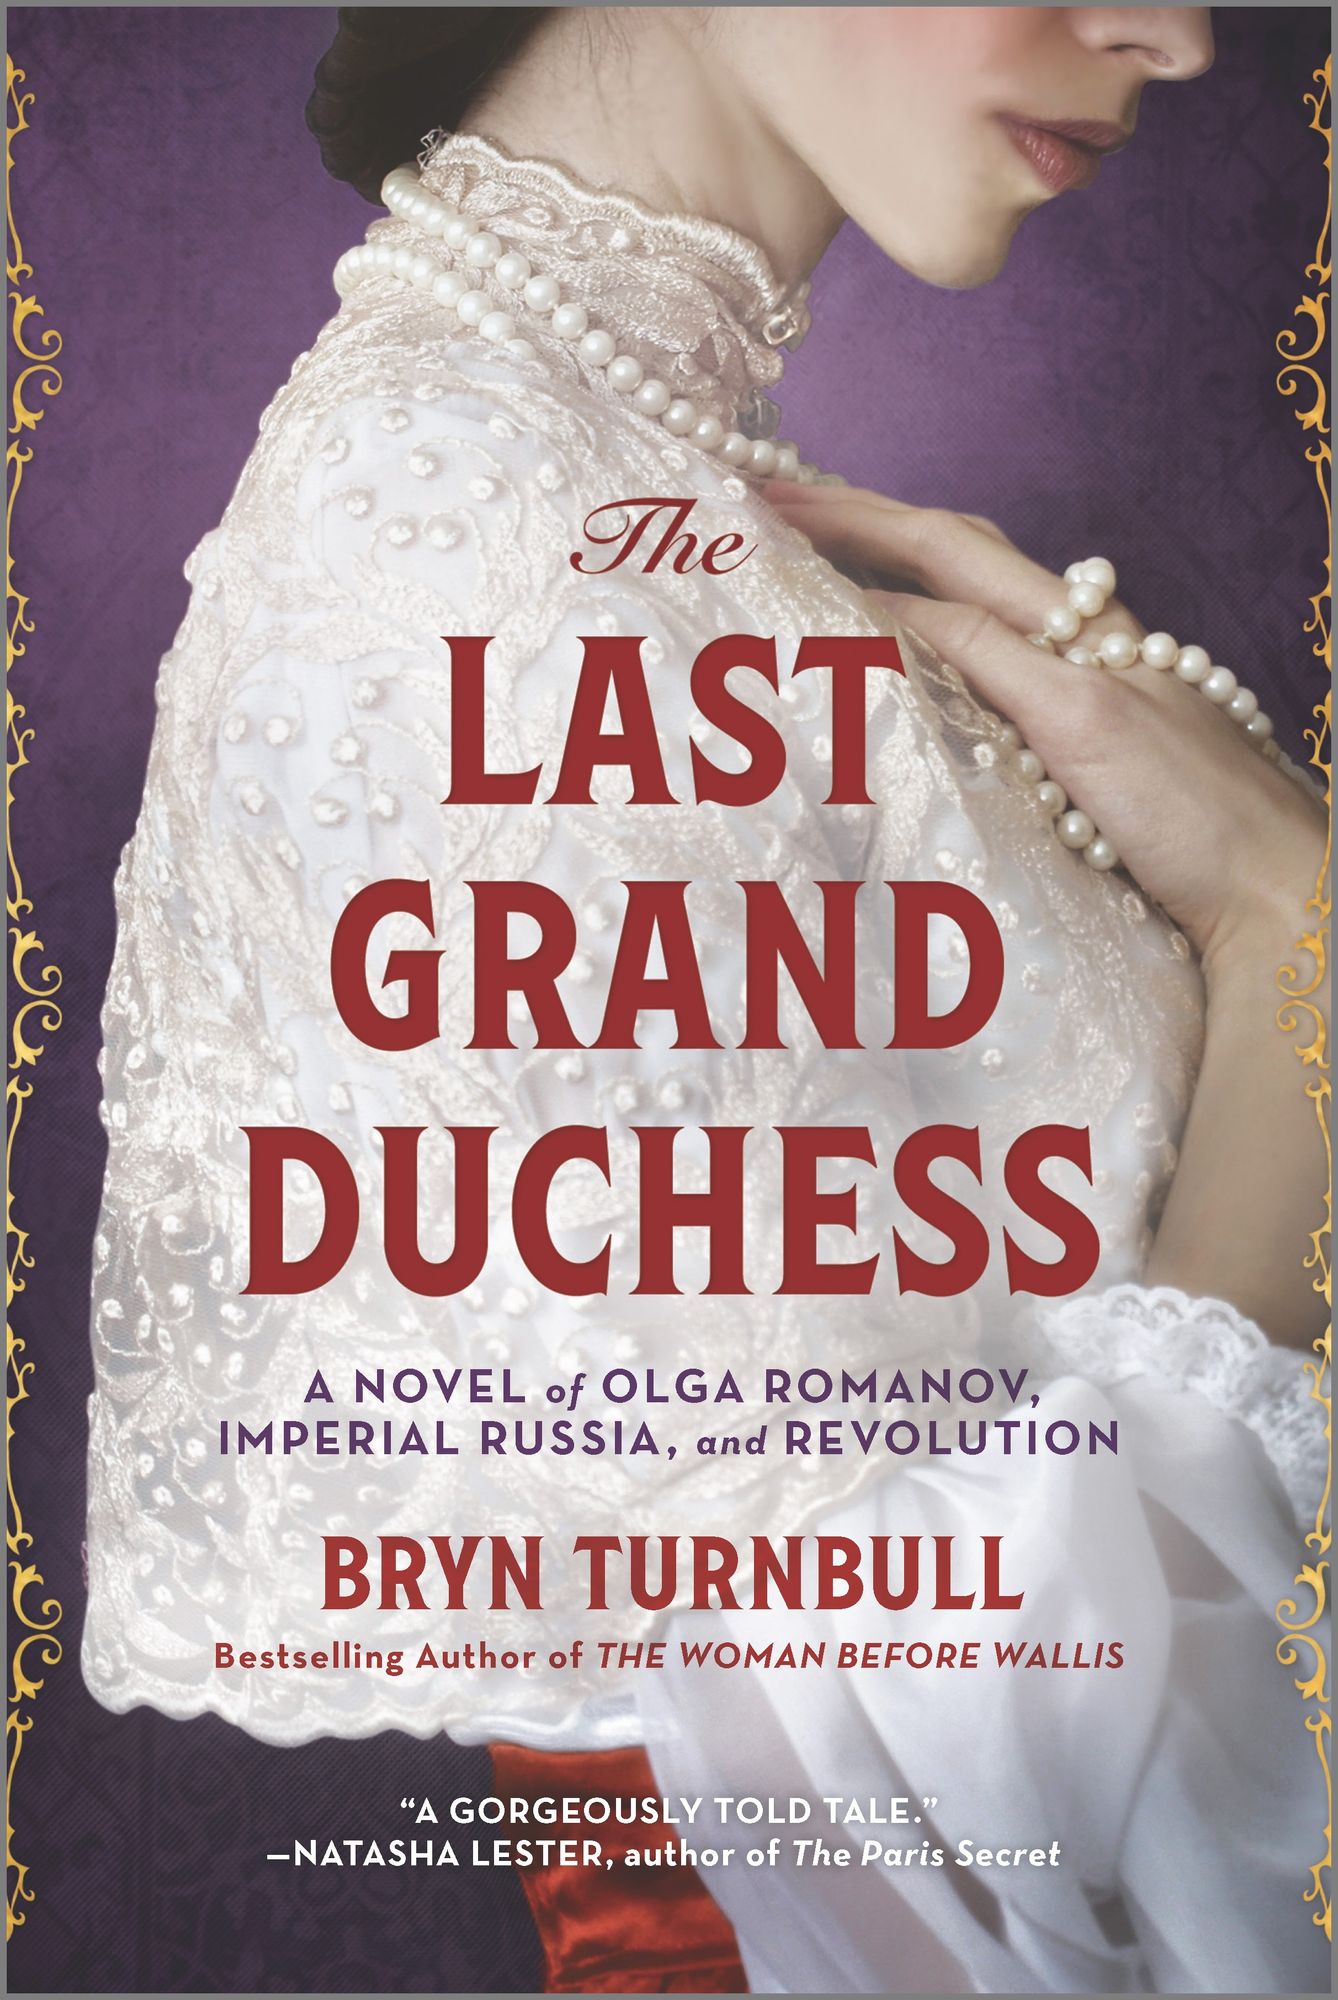 The Last Grand Duchess by Bryn Turnbull Discussion Guide